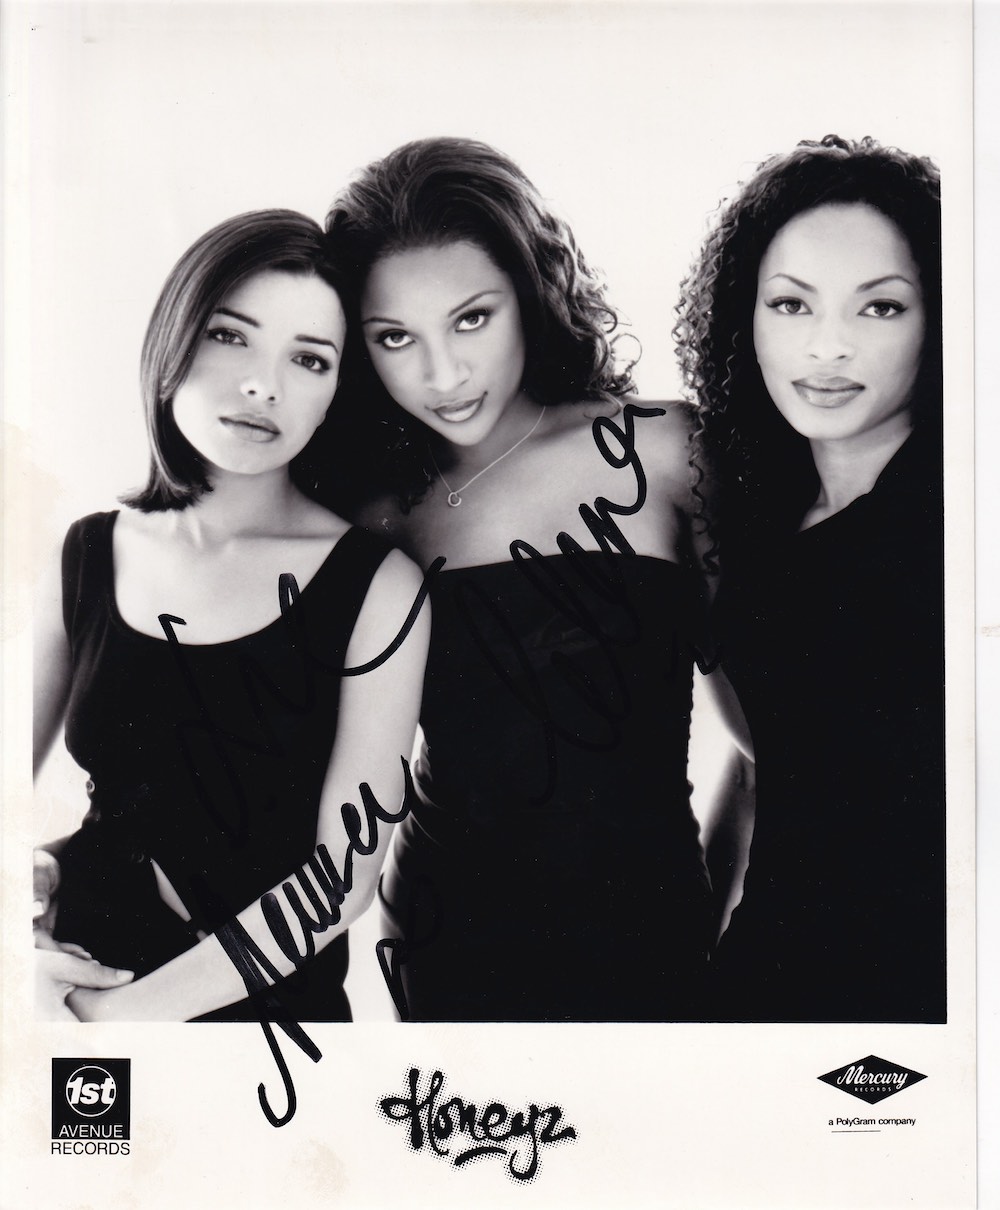 Honeyz Chart Topping Girl Band Fully Signed 10x8 inch Promo Photo. Good Condition. All autographs